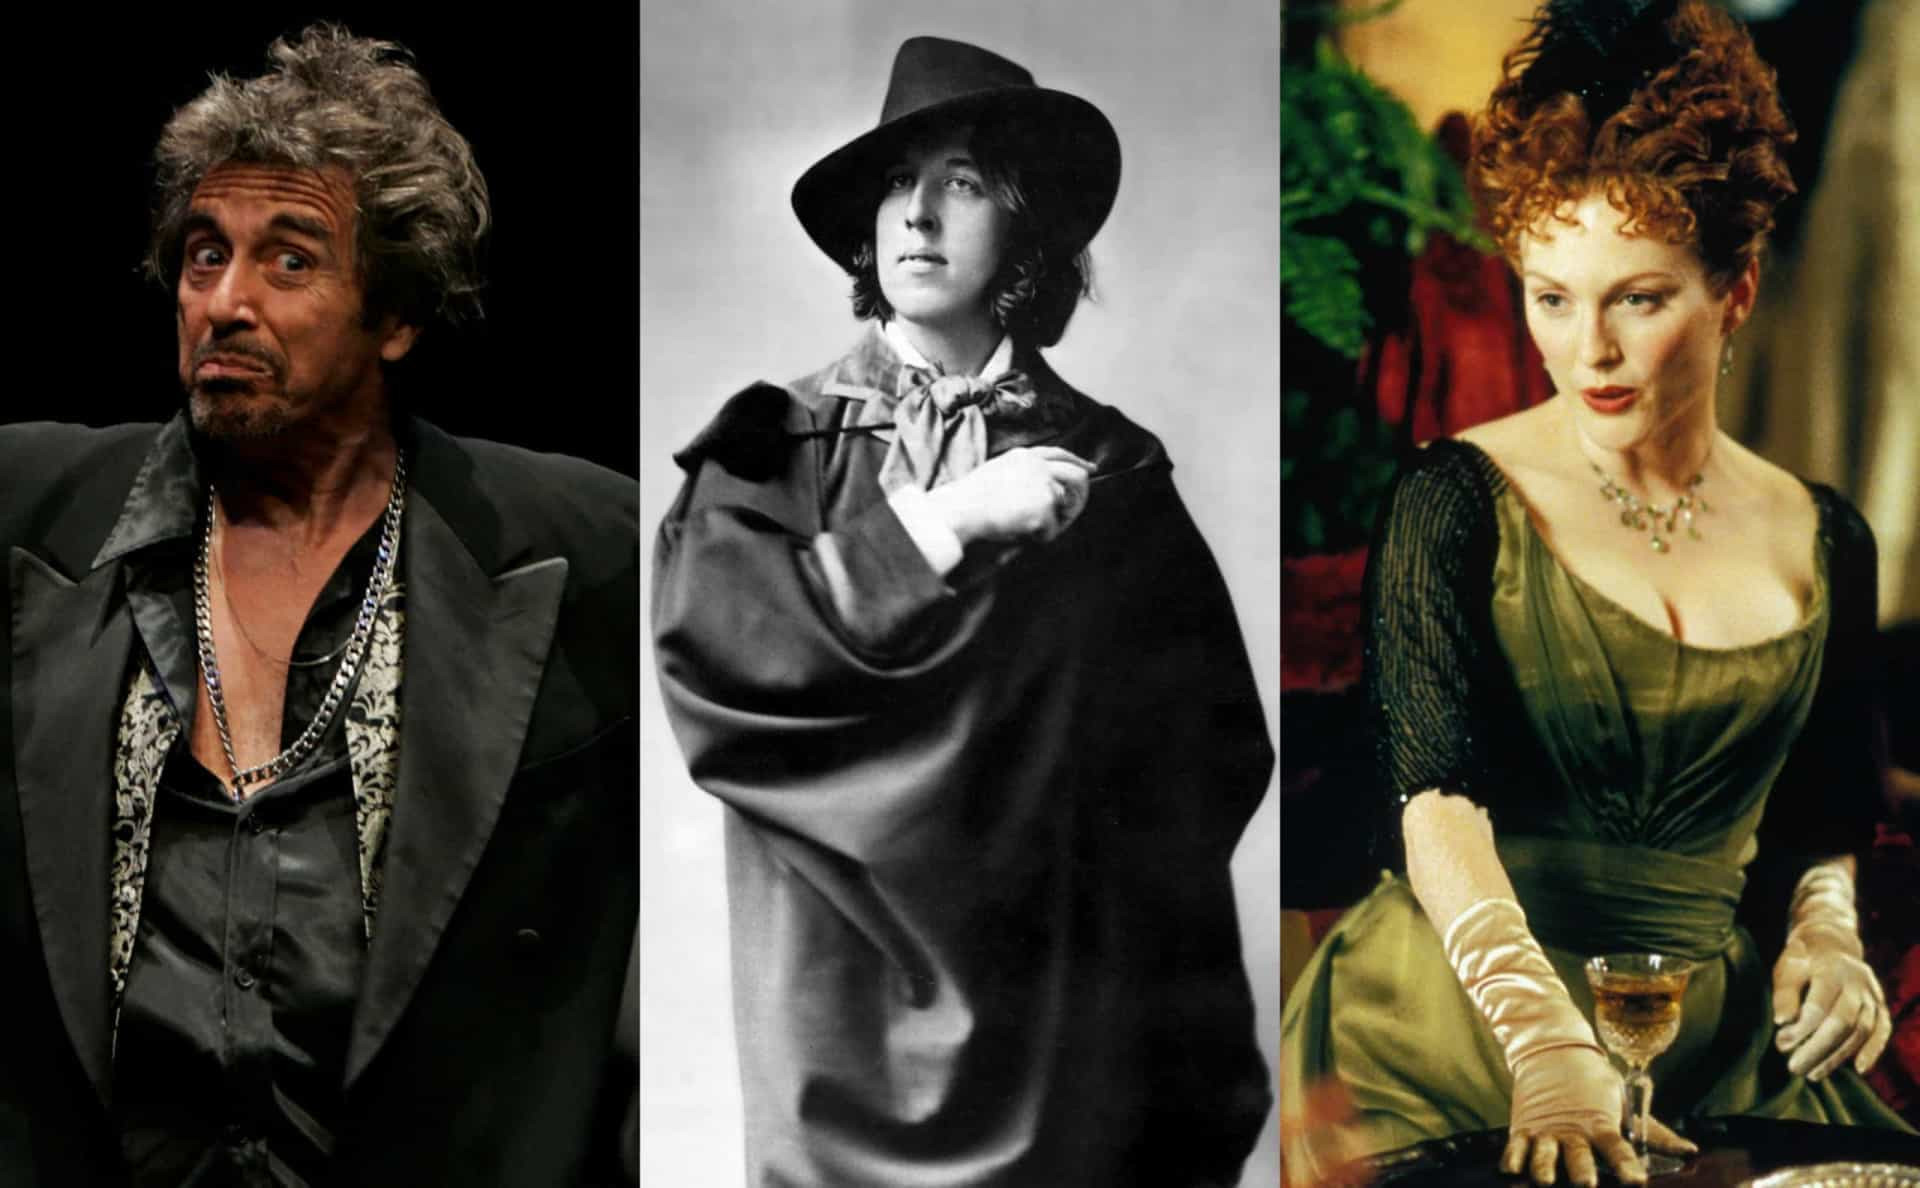 <p>In his short life, Oscar Wilde became one of the most successful playwrights of late-Victorian London. His society comedies of the early 1890s, works like 'Lady Windermere's Fan' and 'An Ideal Husband,' were instant hits. His final play, 'The Importance of being Ernest,' is considered his masterpiece.</p> <p>Wilde died in 1900, but his plays have endured. Since his untimely death, the Irish playwright’s works have been performed around the world, with a host of celebrity <a href="https://www.starsinsider.com/celebrity/442957/sarah-bernhardt-the-worlds-first-a-list-actress" rel="noopener">A-listers</a> including Al Pacino and Vanessa Redgrave lining up to interpret characters made famous by one of the most celebrated—and controversial—personalities of the era.</p> <p>Click through the following gallery and be reminded of some of the great stage and screen productions that owe their success to the writings of Oscar Wilde.</p><p>You may also like:<a href="https://www.starsinsider.com/n/239903?utm_source=msn.com&utm_medium=display&utm_campaign=referral_description&utm_content=443911v5en-us"> The UK and Ireland's most fascinating Neolithic sites</a></p>